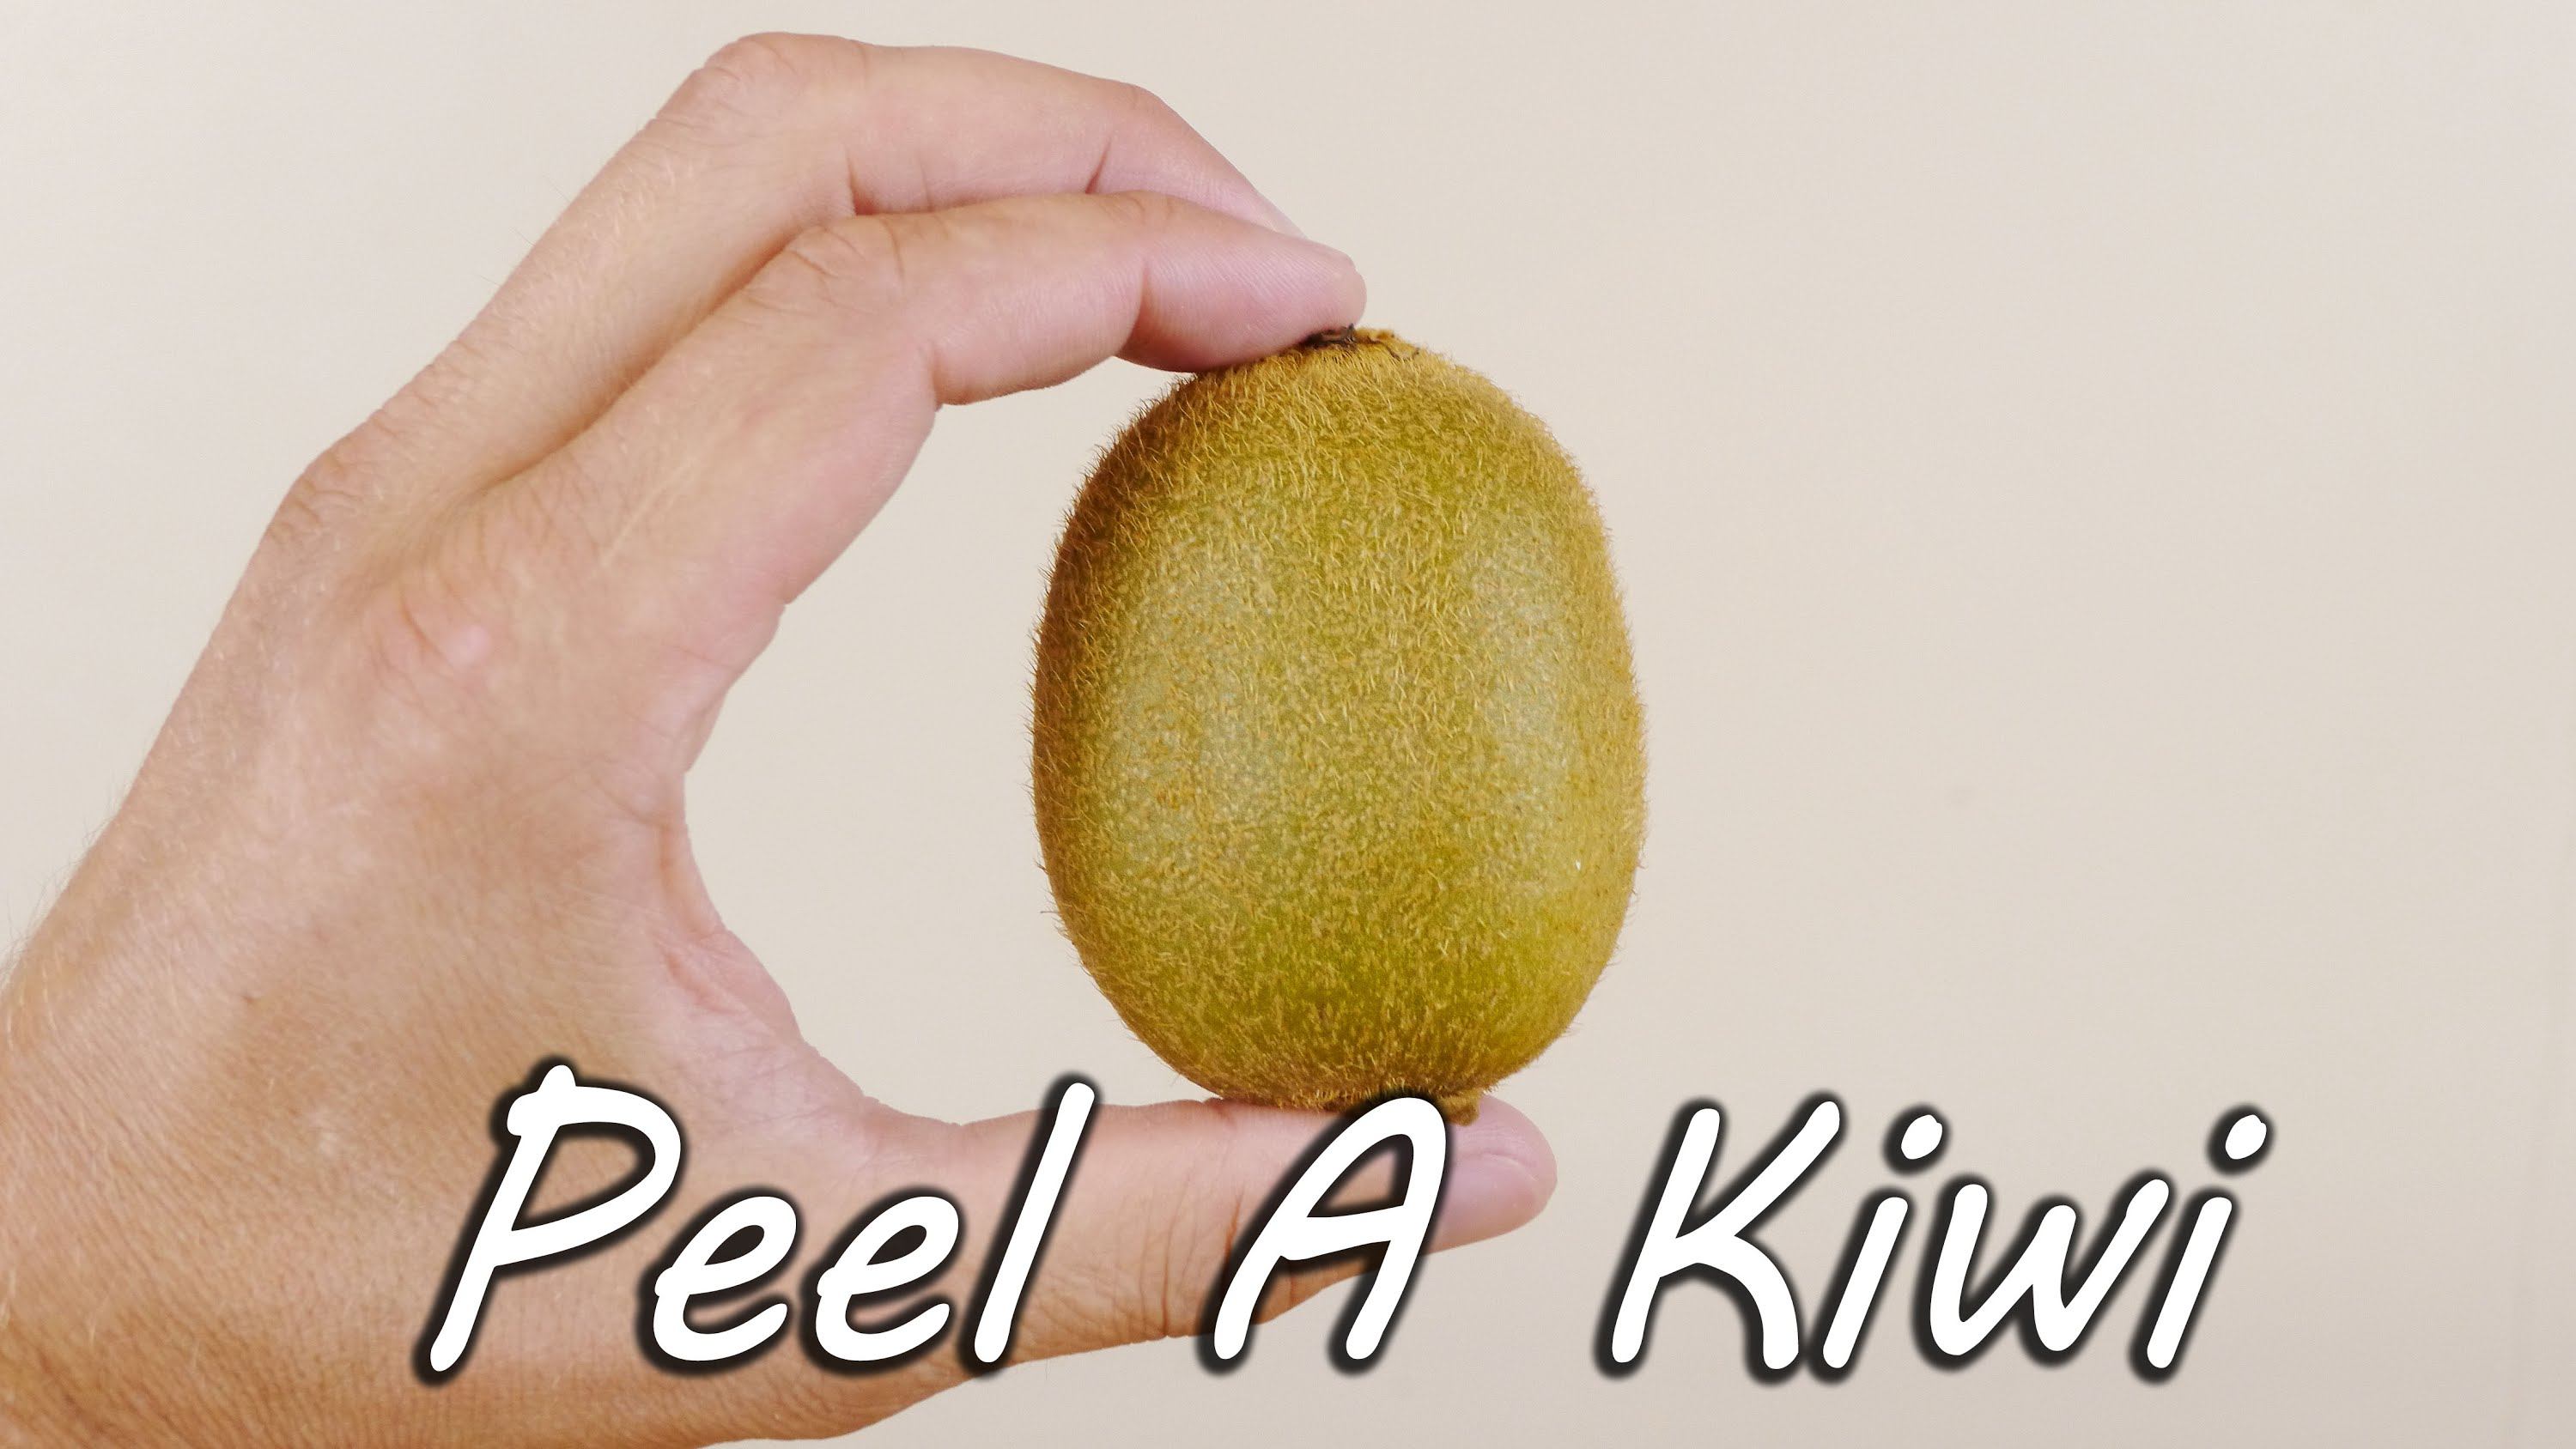 You’ve Got to See this Amazing Way to Peel a Kiwi!